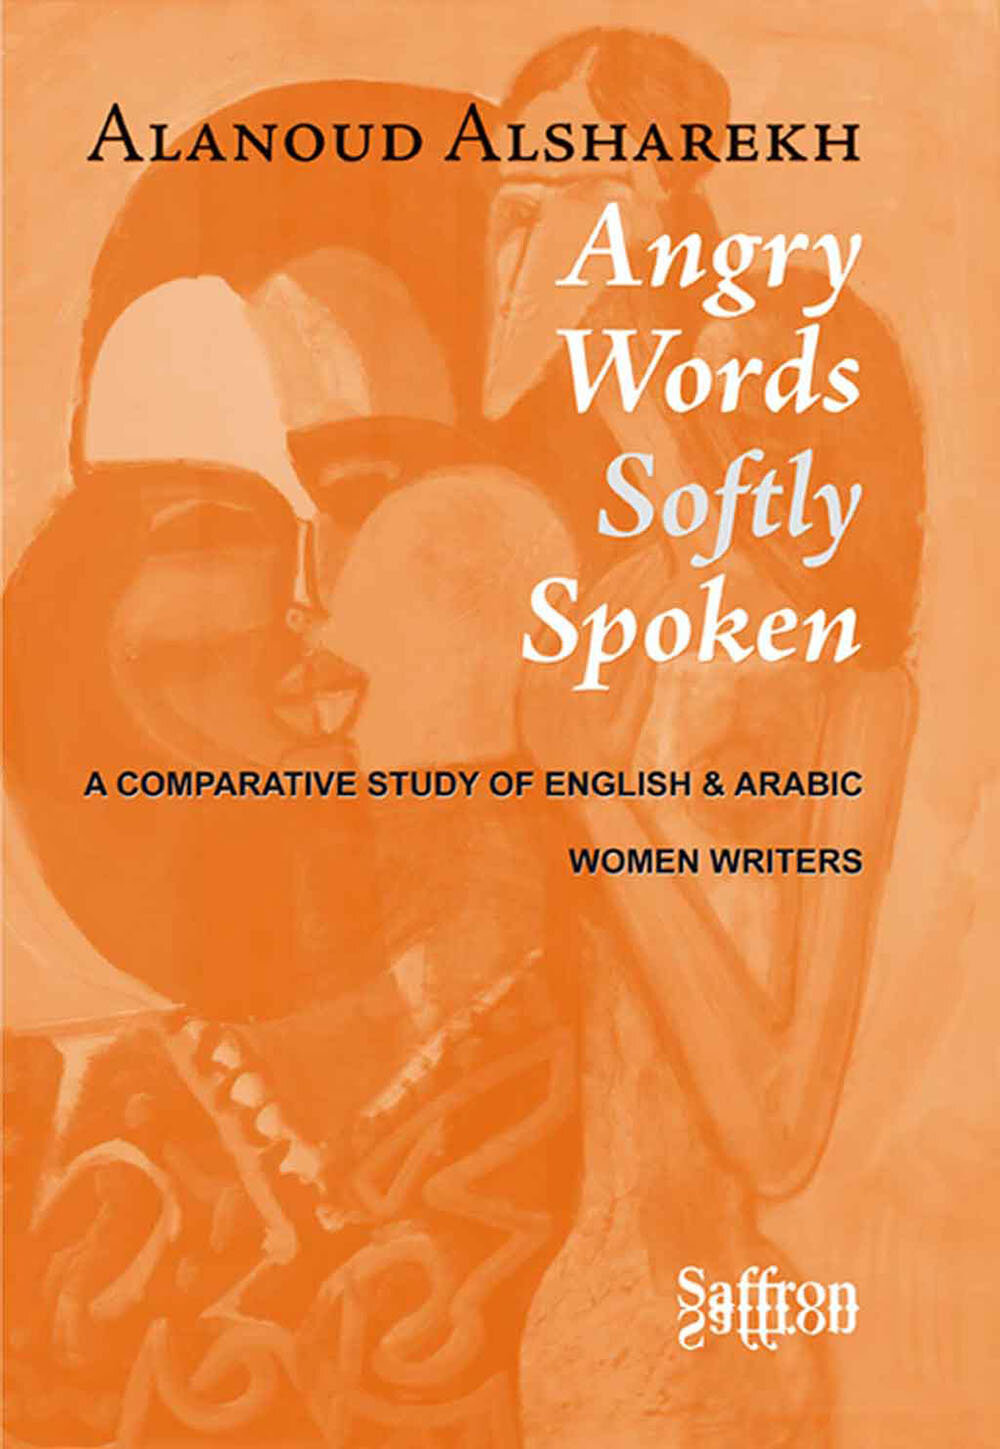 Alanoud Alsharekh's first book,  Angry Words Softly Spoken